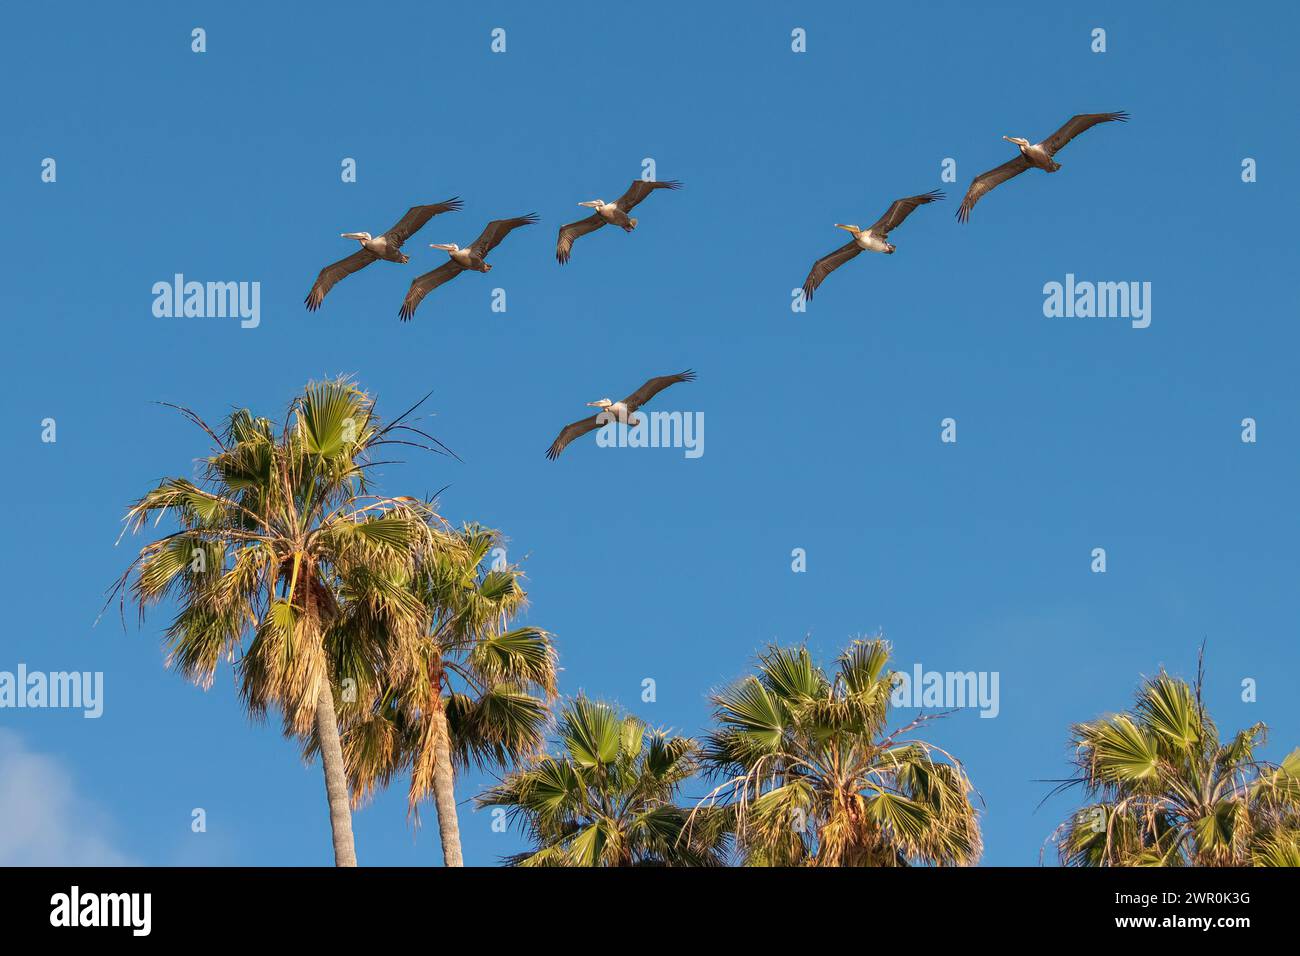 flock of six pelicans fly glide across clear blue California sky and above tall Mexican Fan Palm trees in America Stock Photo